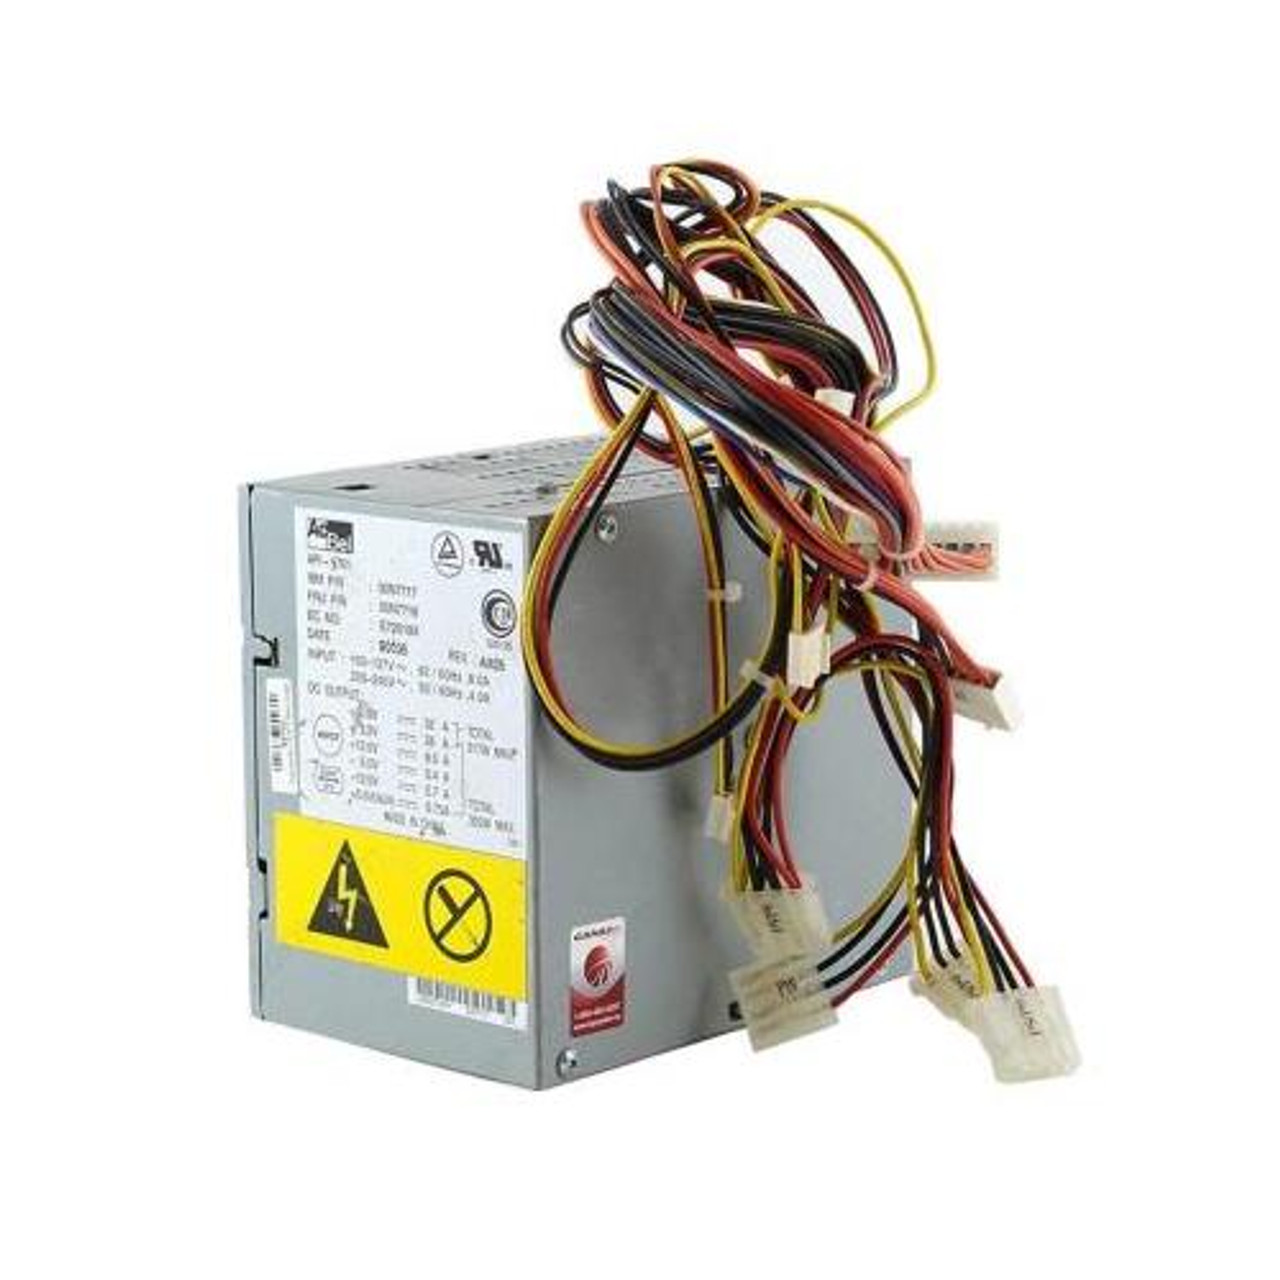 00N7718 IBM 330-Watts Power Supply for System